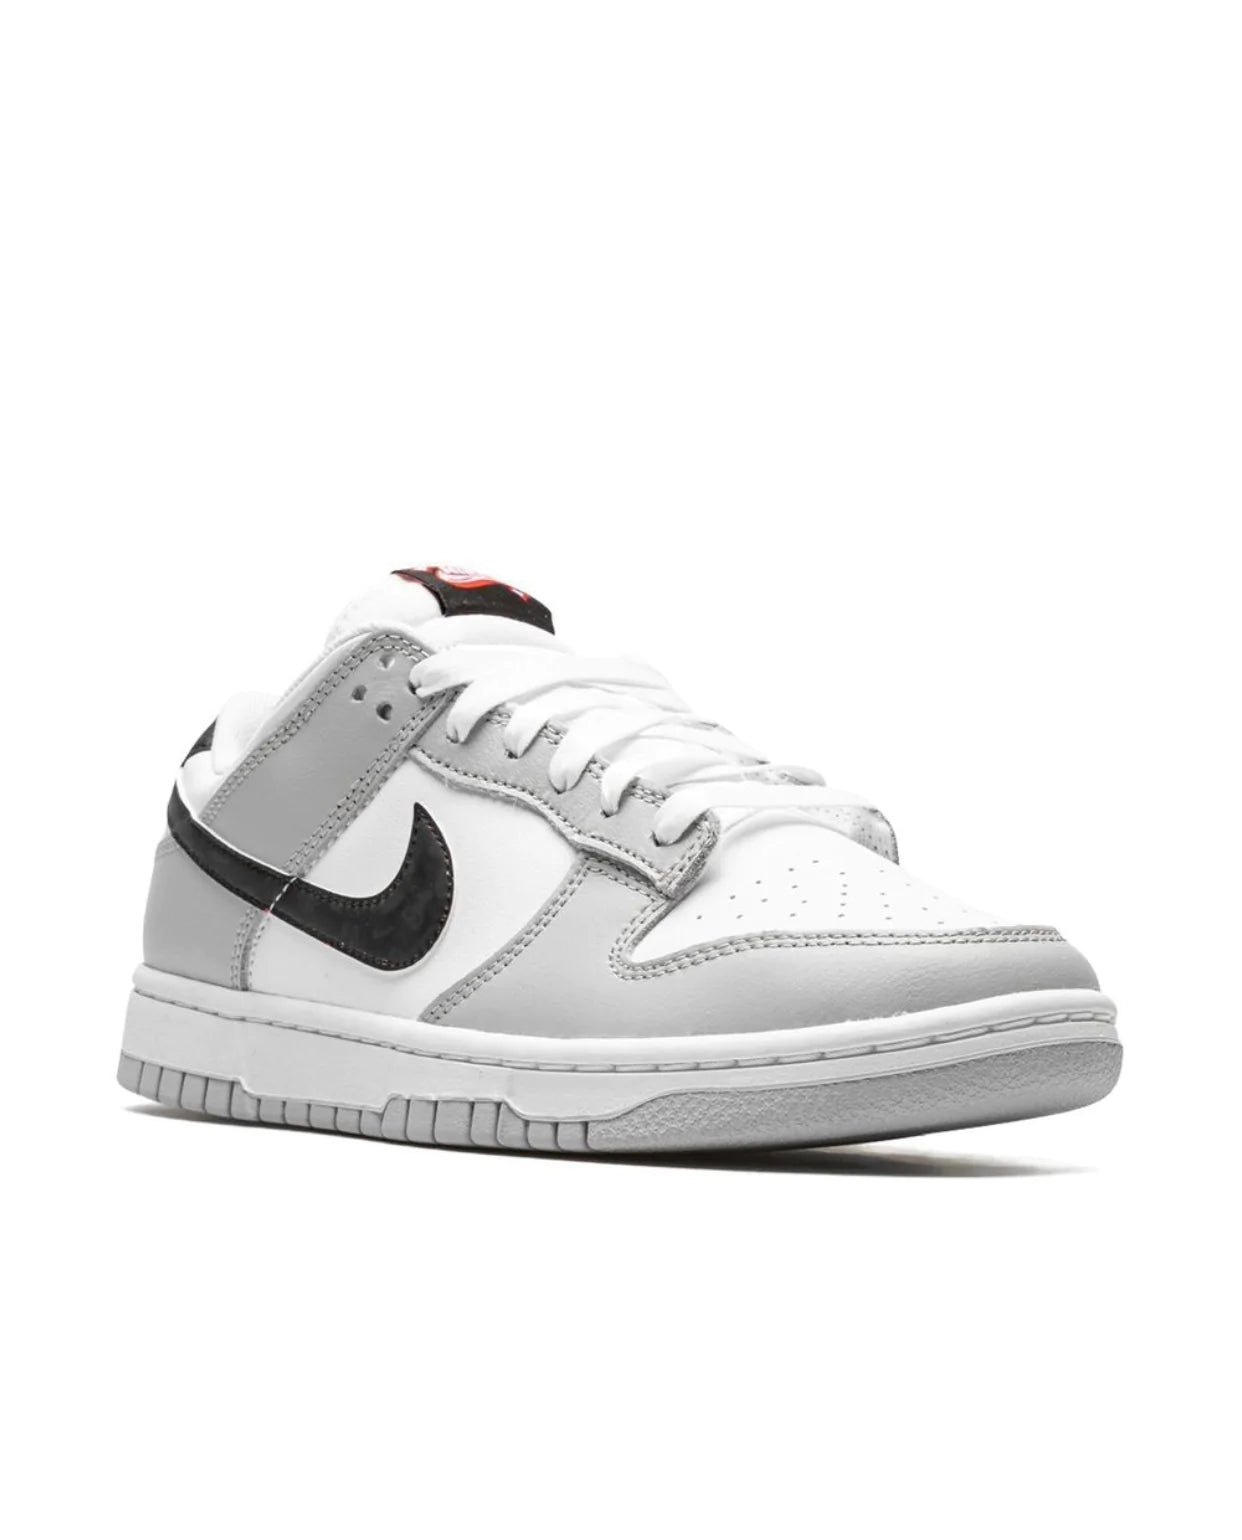 Nike Dunk Low - Lottery Pack Gray